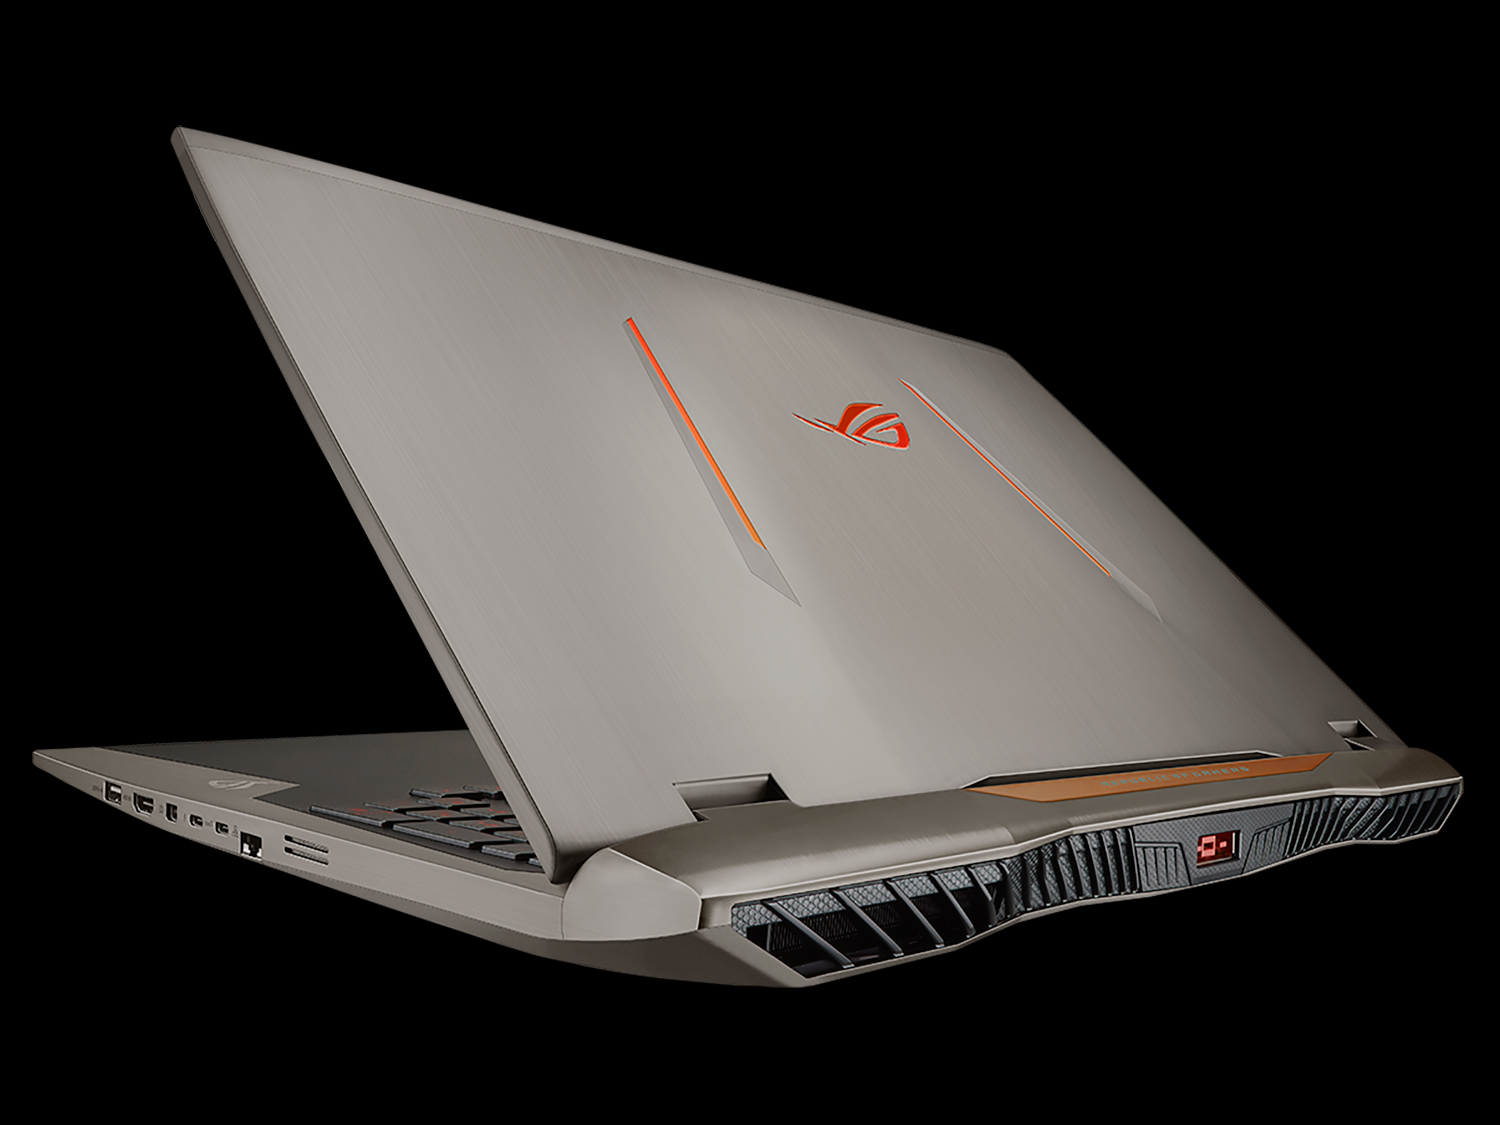 ASUS ROG G701VI gaming laptop with NVIDIA GTX 1080 now available 